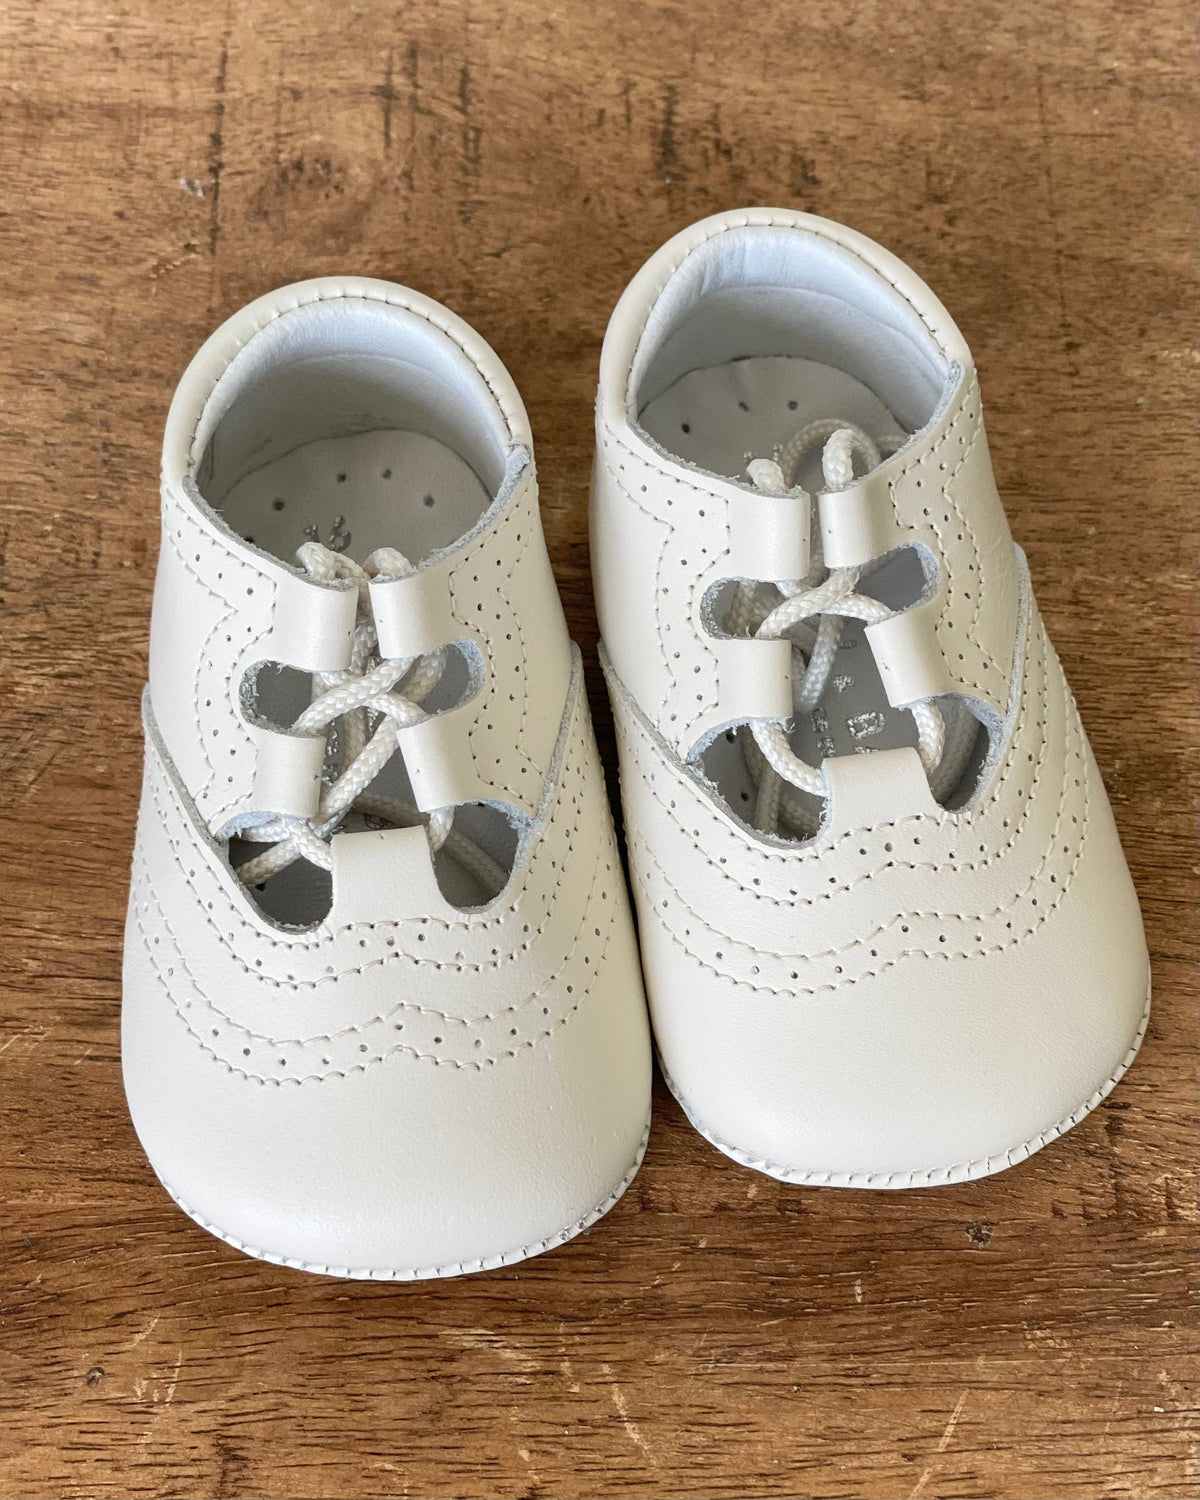 Off-White Pre-Walker English Shoe for Baby Boy - Made in Spain YoYo